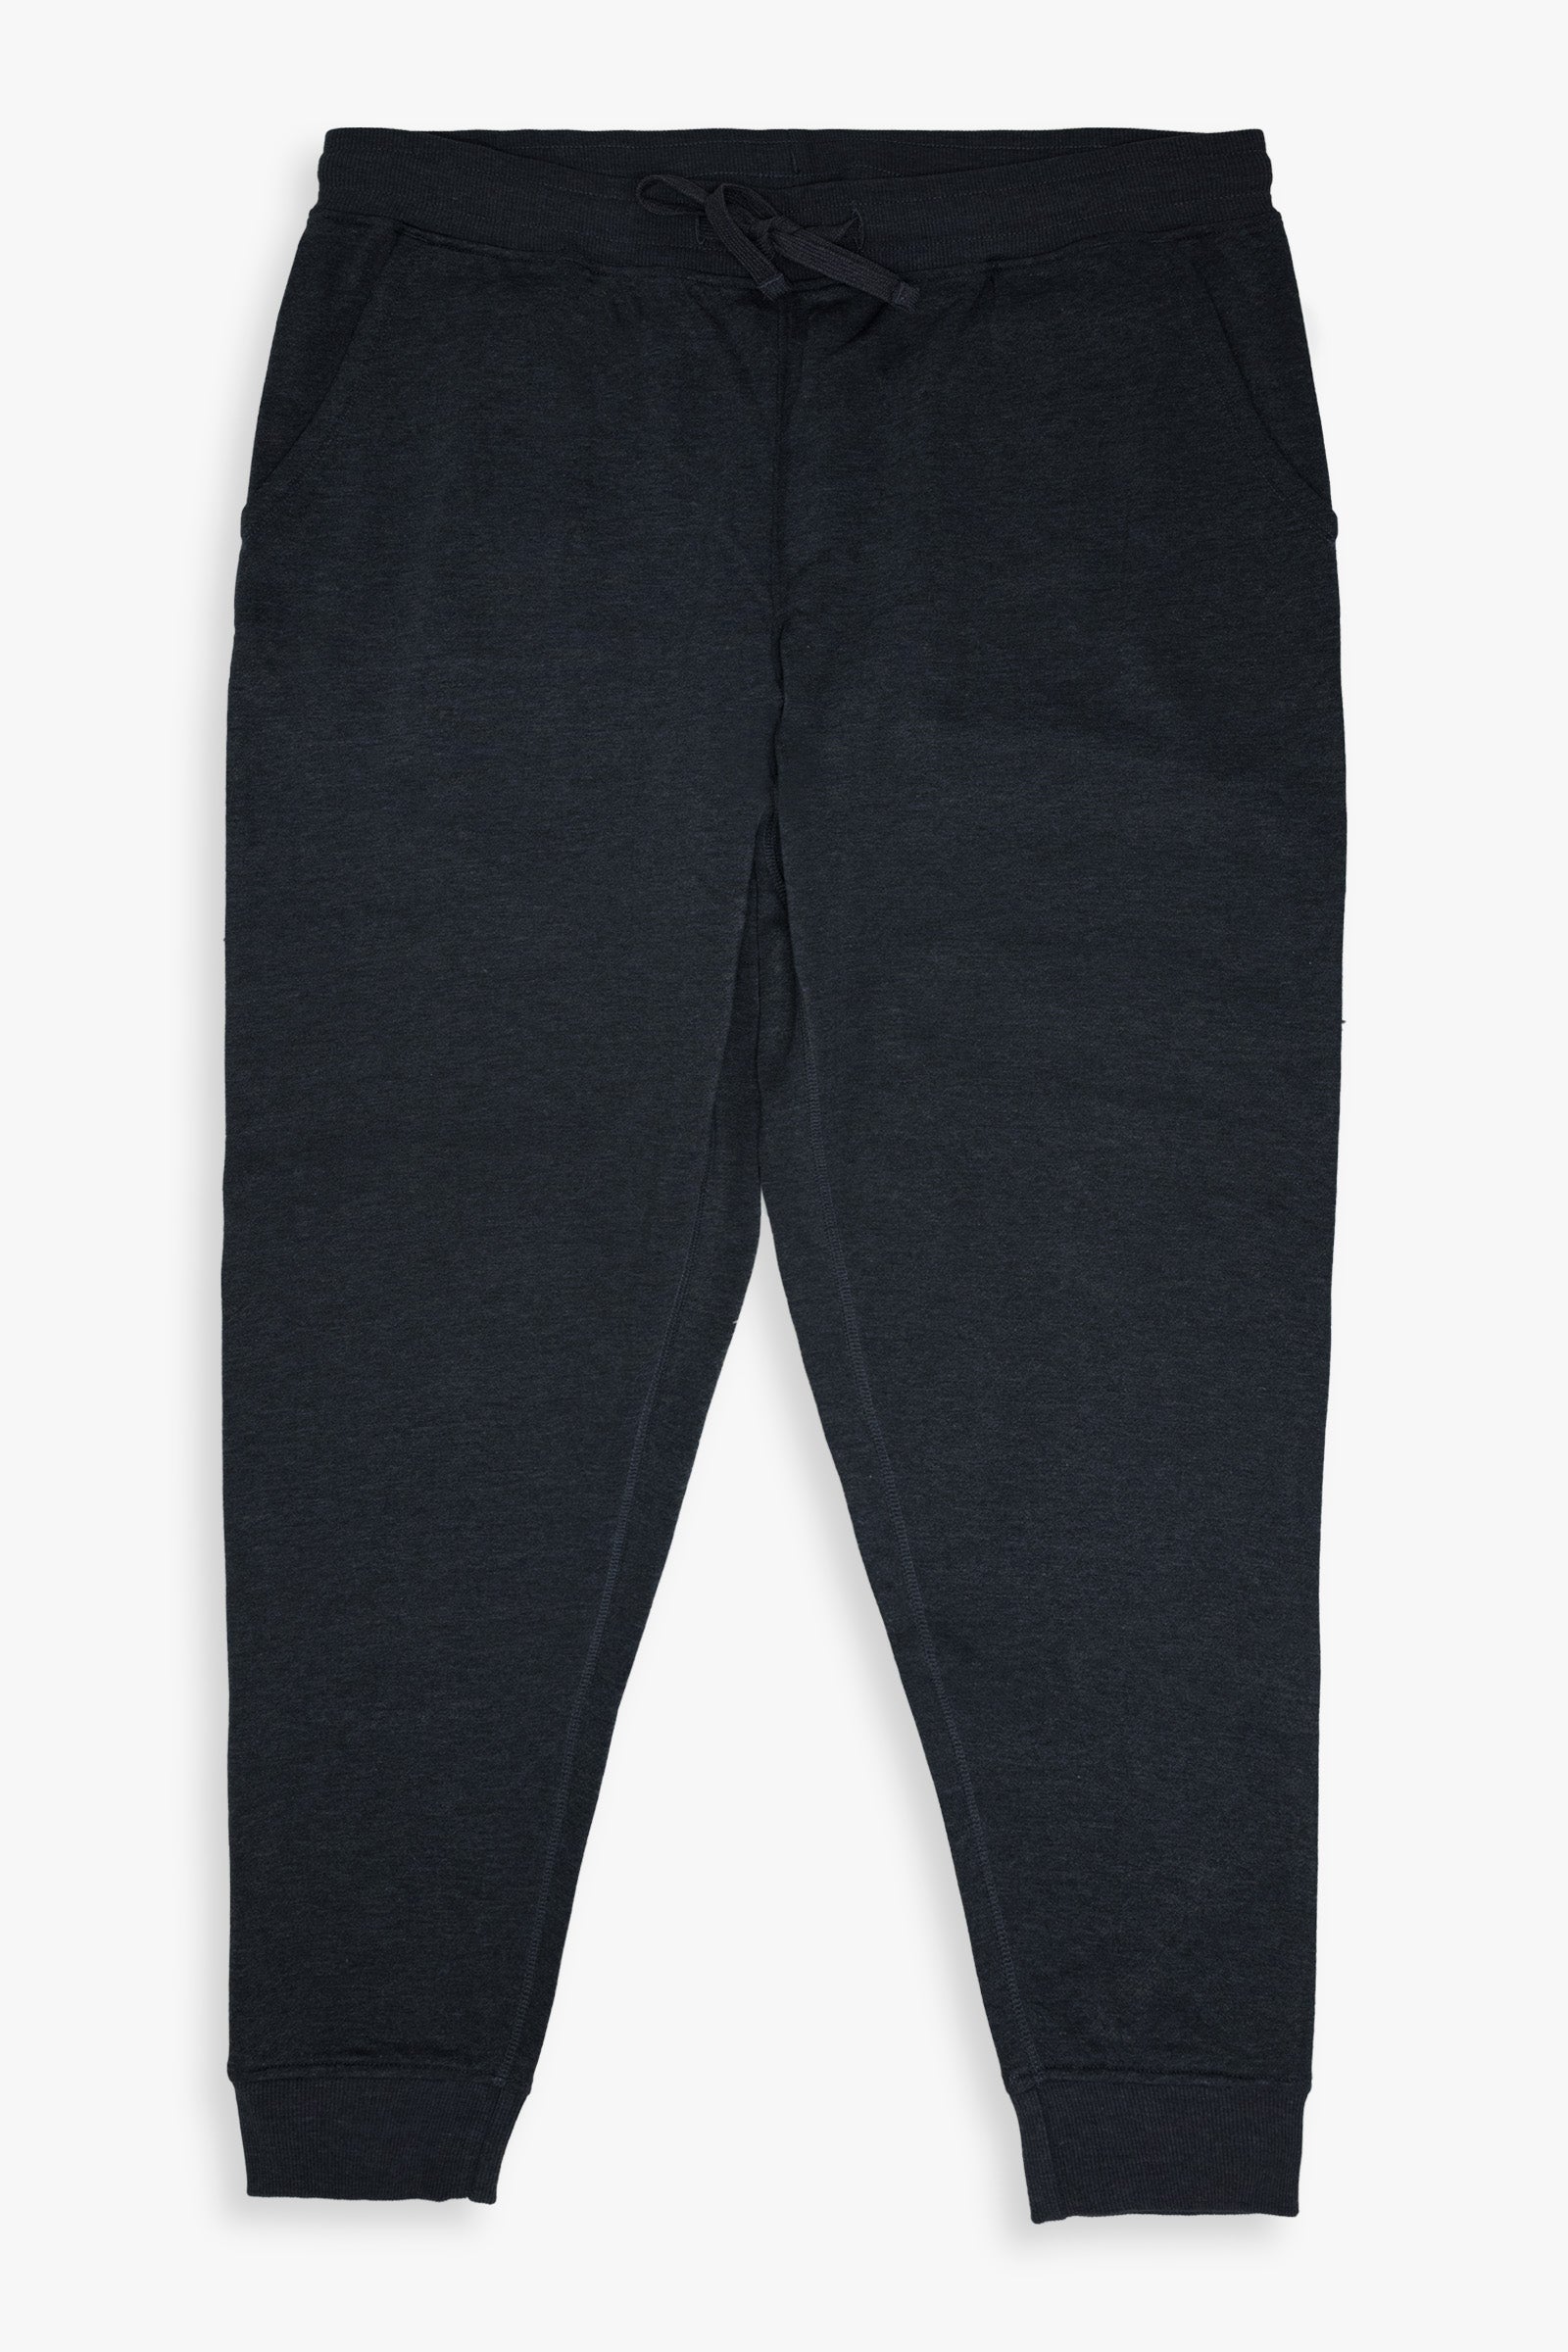 Adult Unisex French Terry Pants